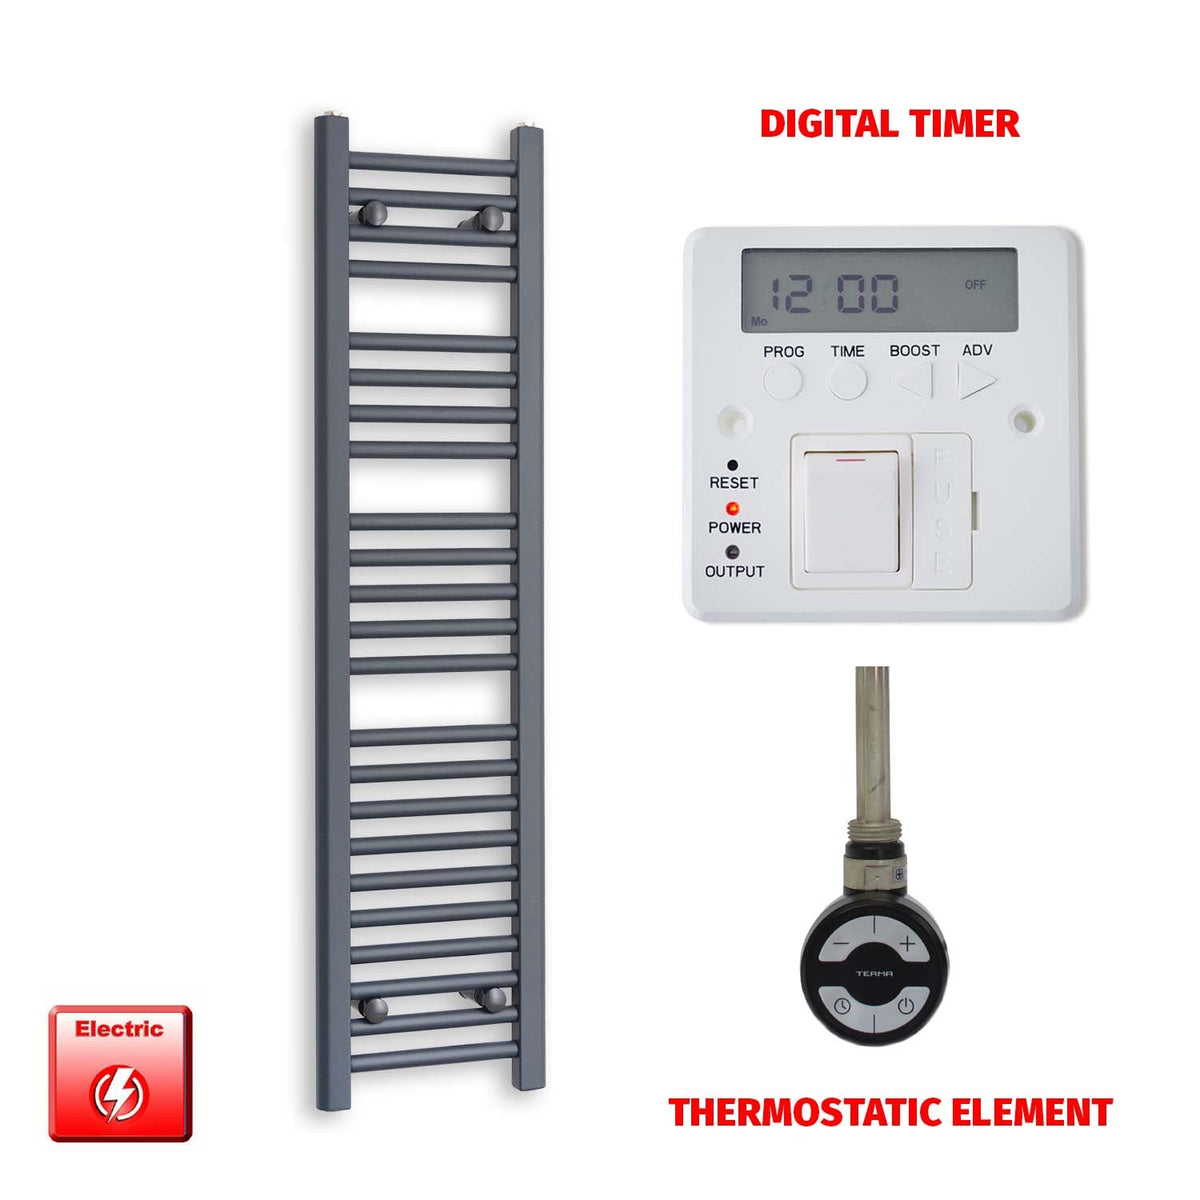 1200mm High 300mm Wide Flat Anthracite Pre-Filled Electric Heated Towel Rail Radiator HTR MOA Thermostatic element Digital timer